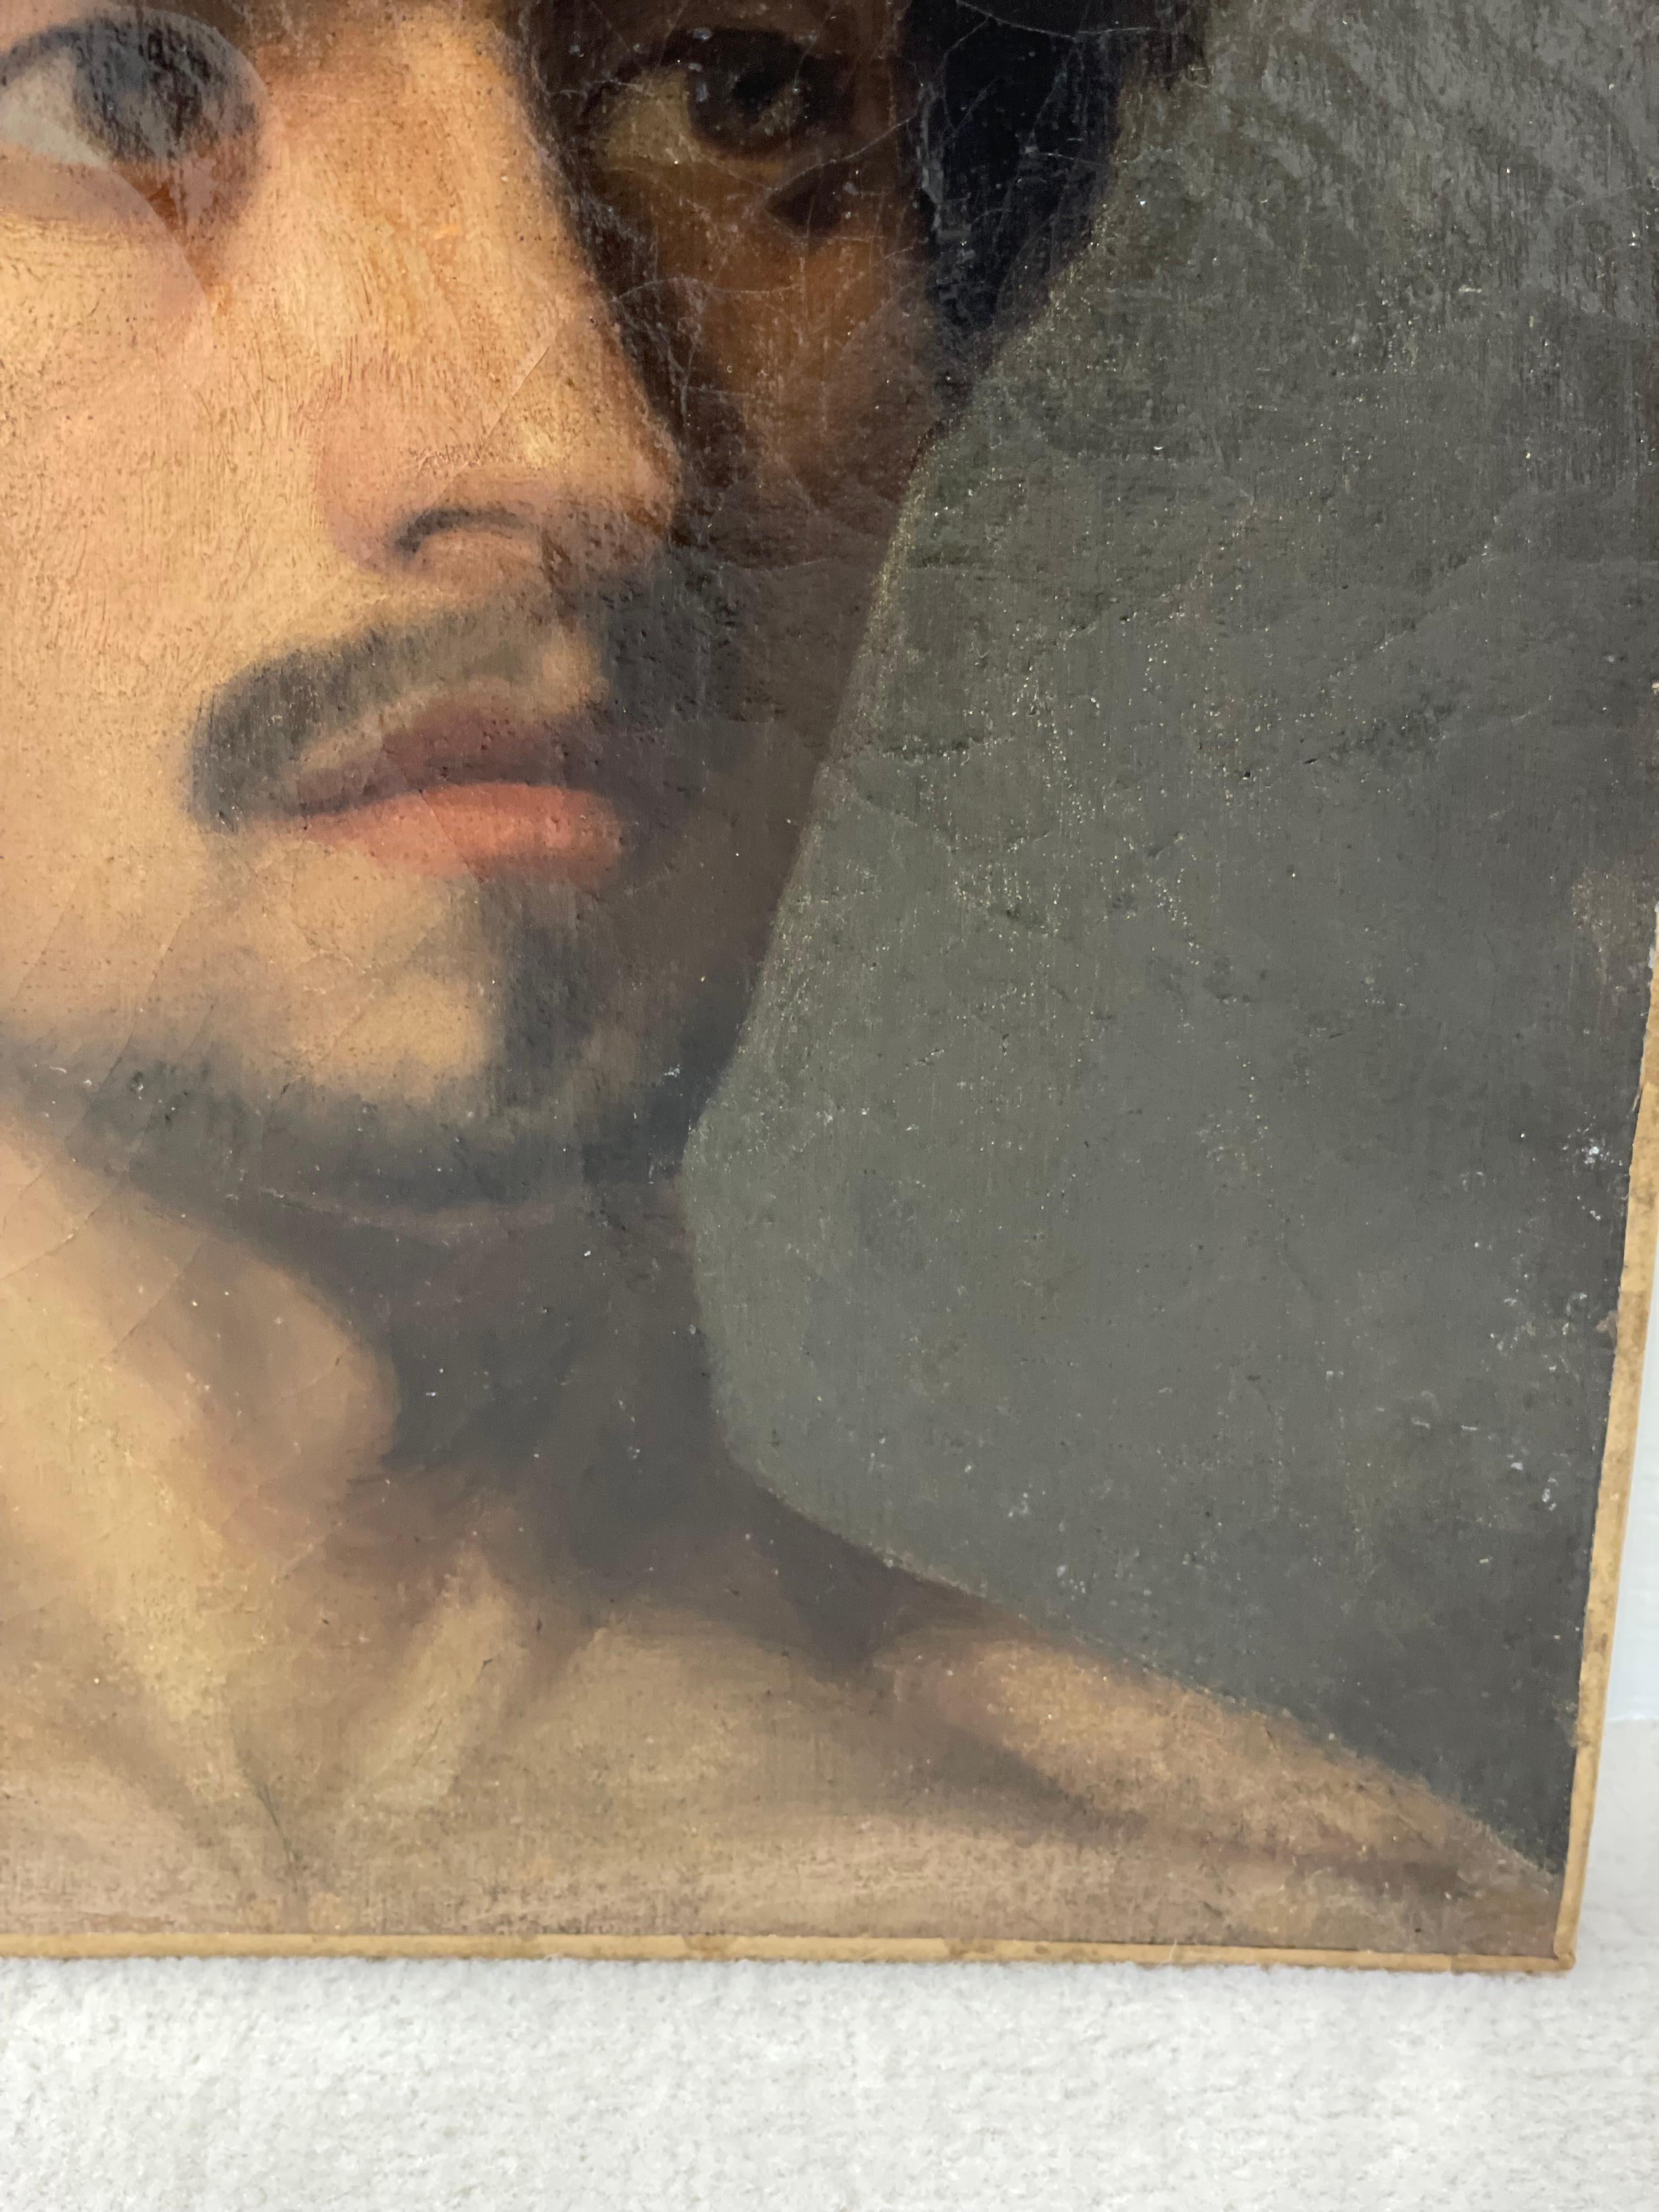 French oil on canvas from the end of the 19th century, young dark-haired man with a mustache looking to the side. Delicately worked academic painting.